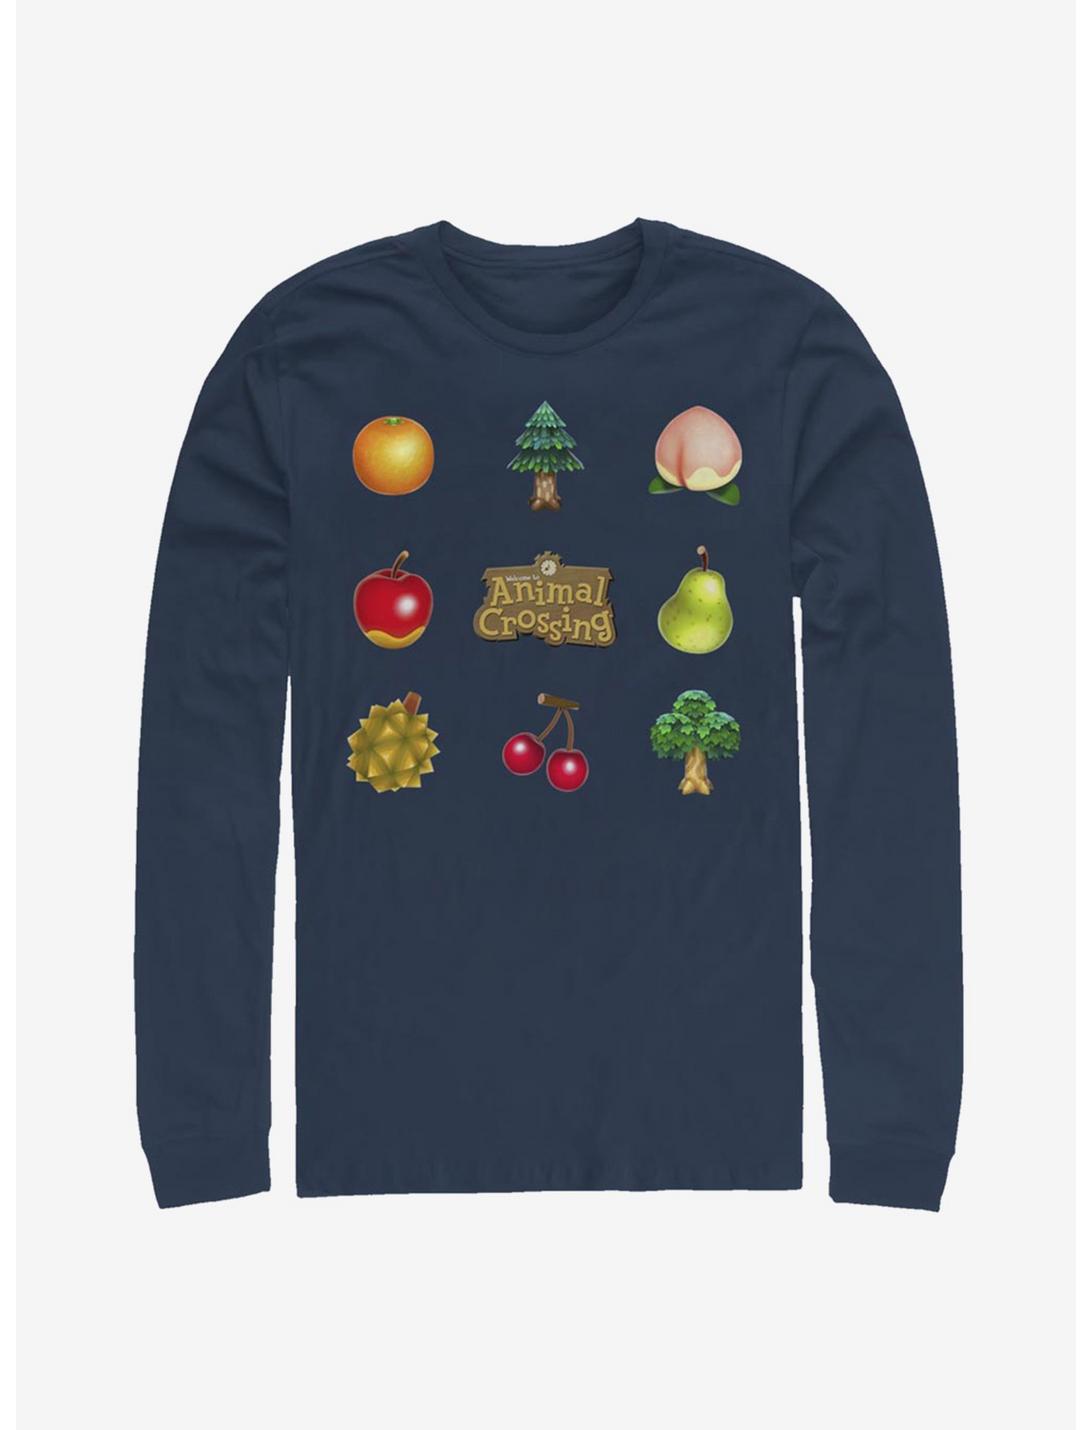 Plus Size Animal Crossing Fruit And Trees Long-Sleeve T-Shirt, NAVY, hi-res